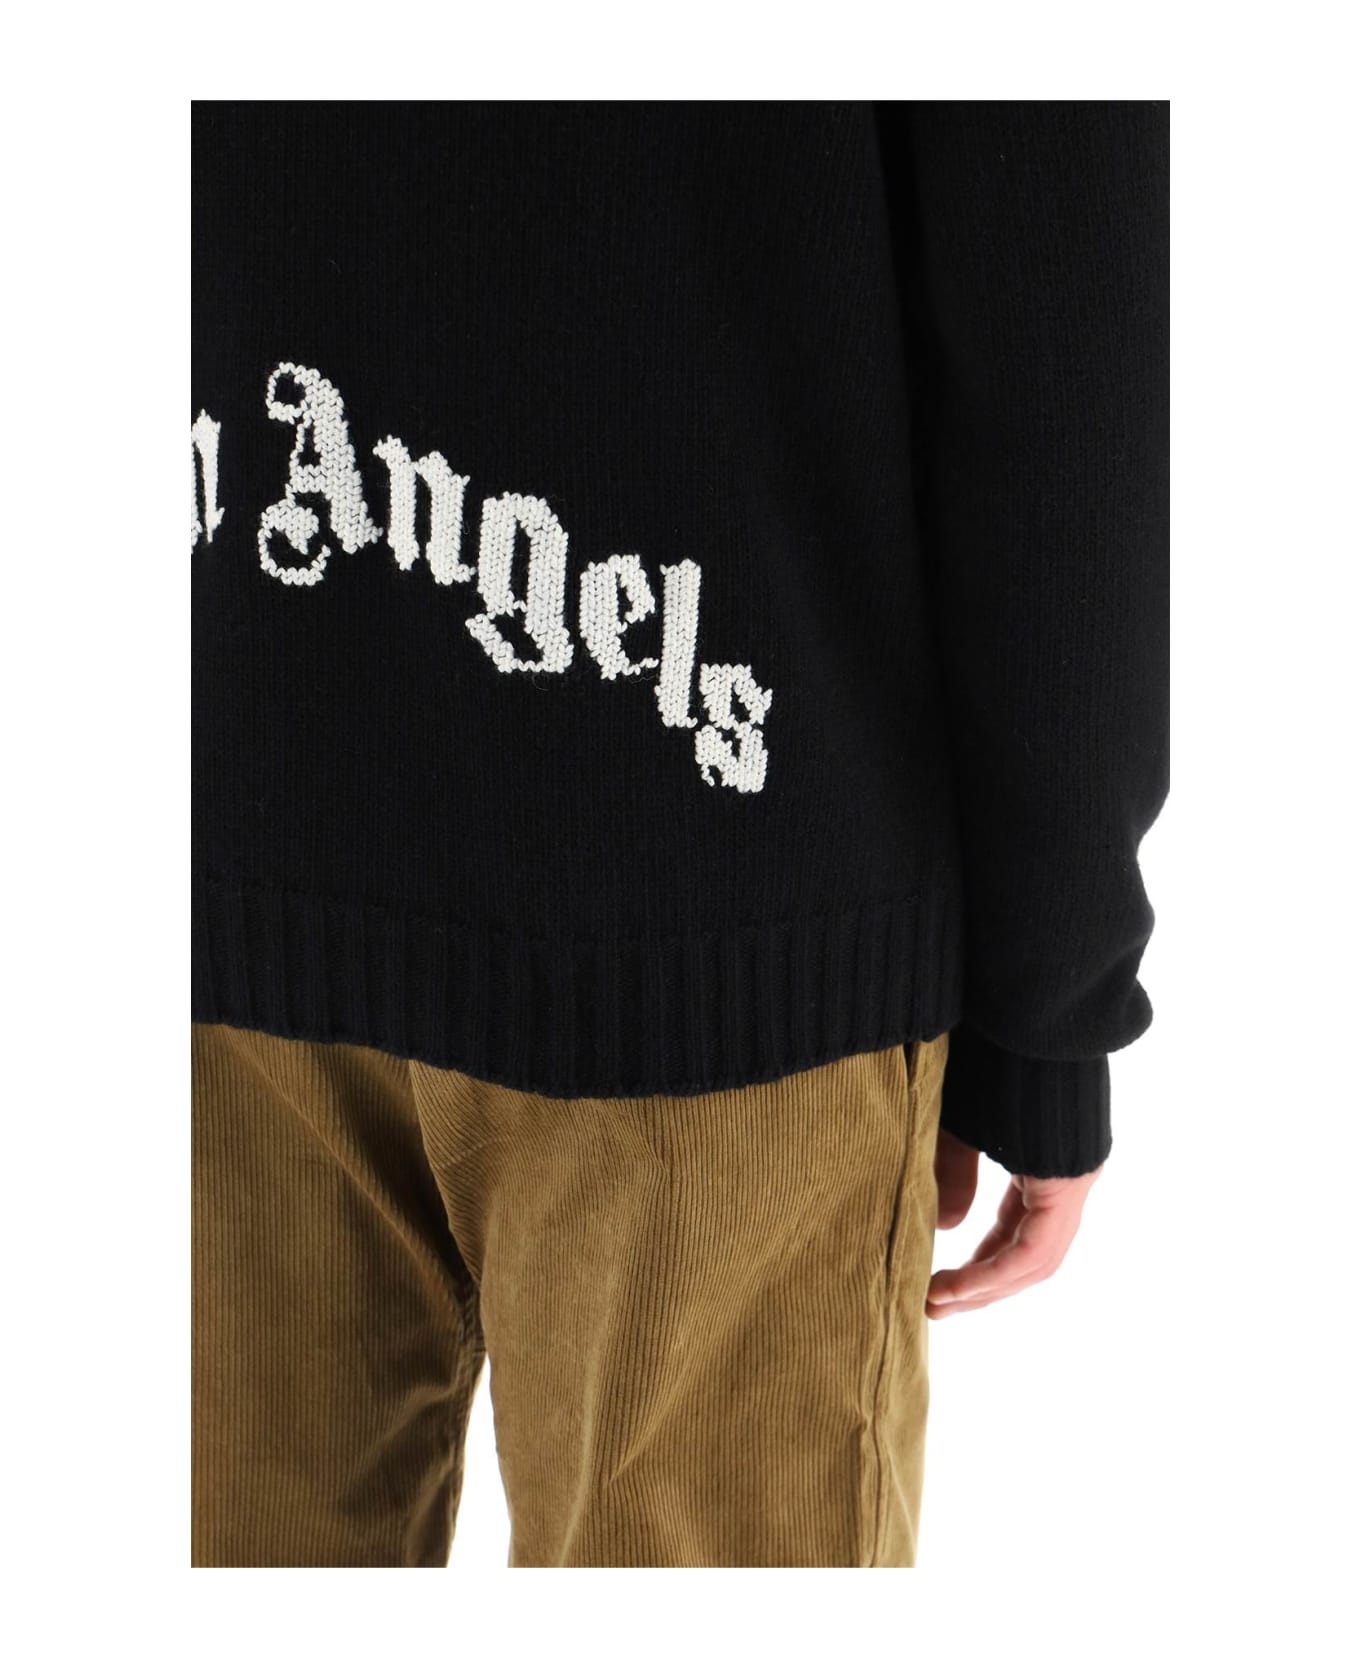 Palm Angels Black Wool Sweater With White Curved Logo On The Back - Black White